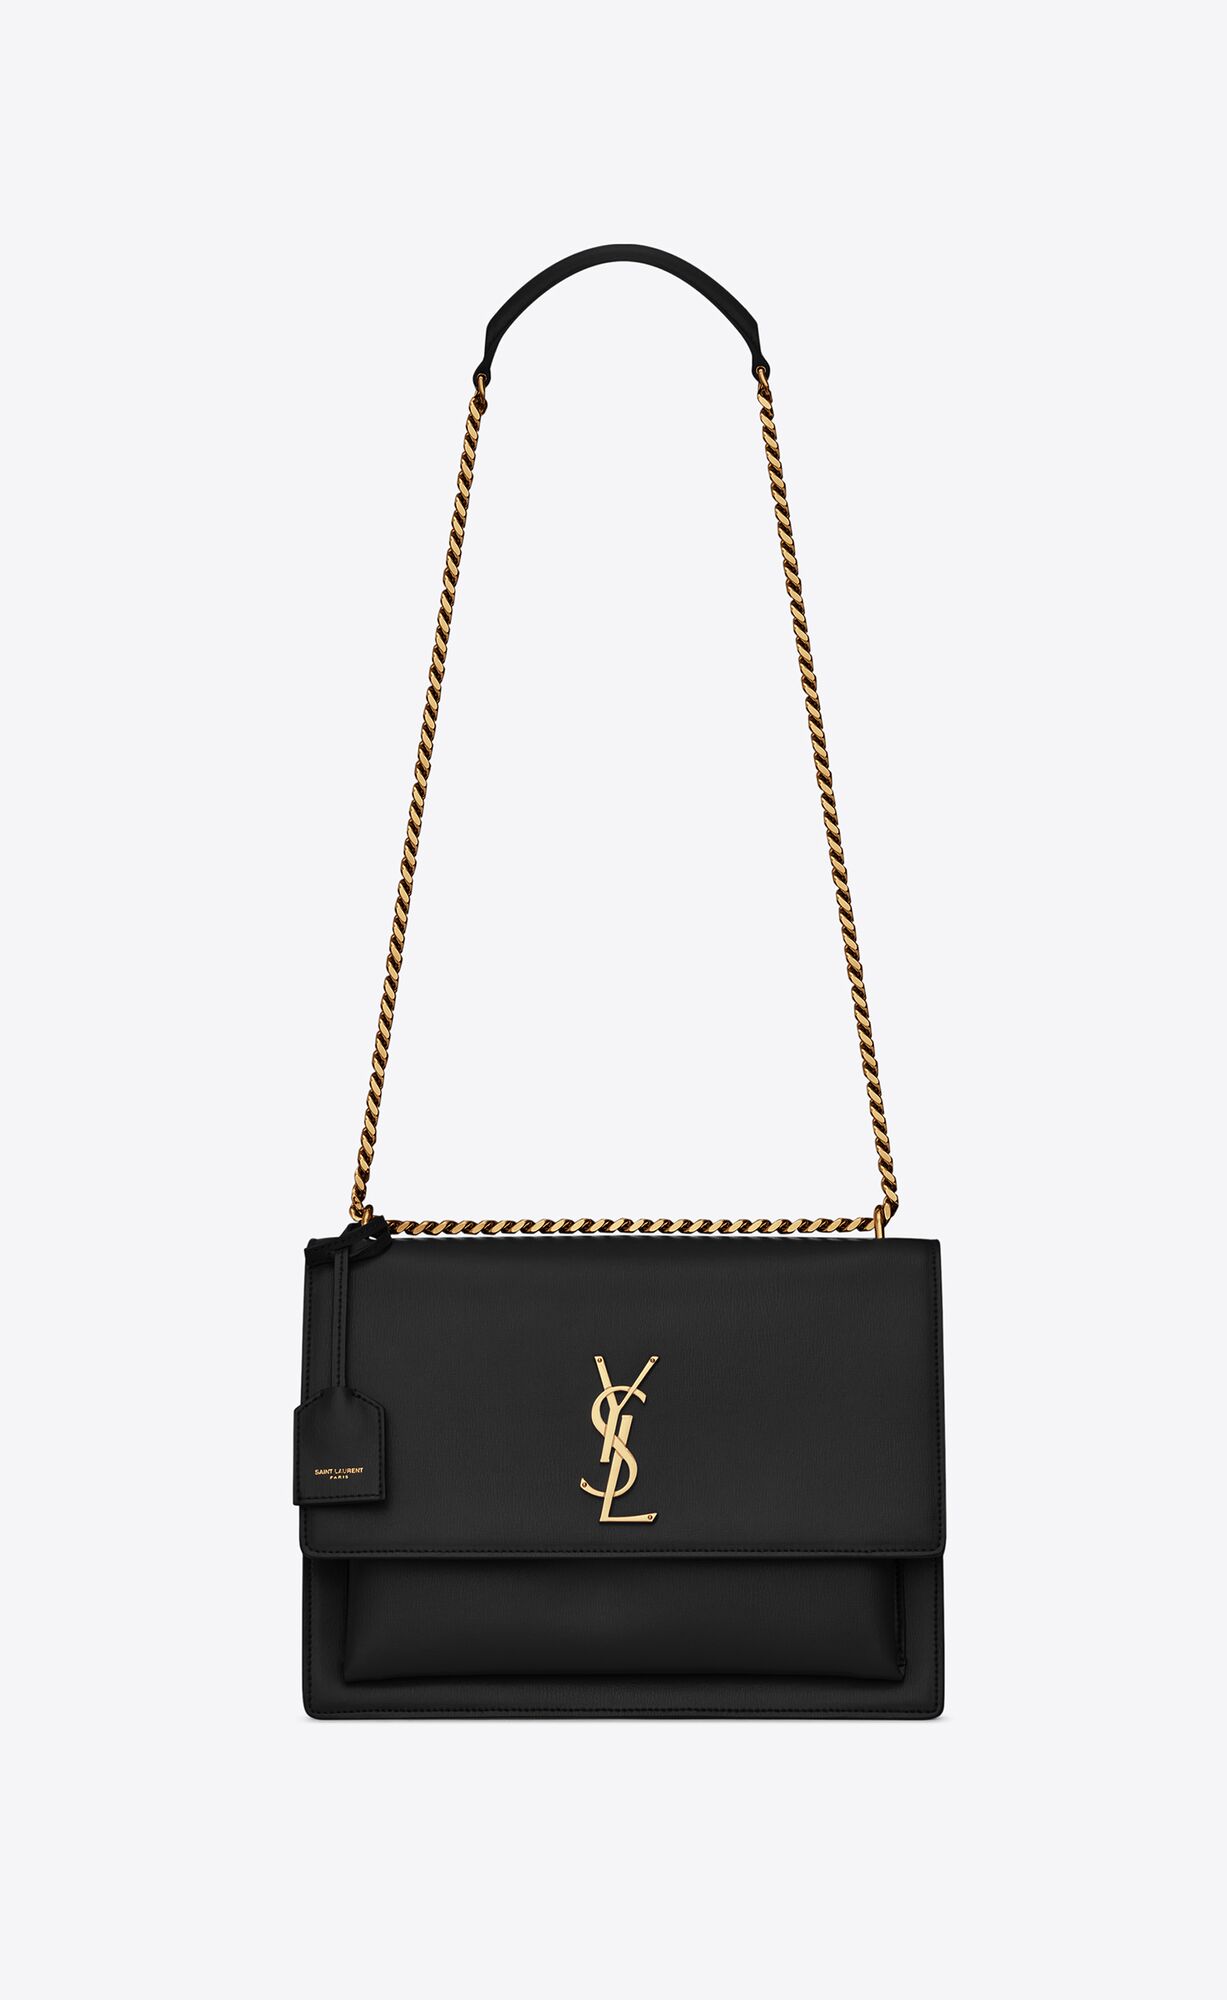 Saint Laurent Sunset Large Chain Bag In Smooth Leather – Noir – 498779D420W1000